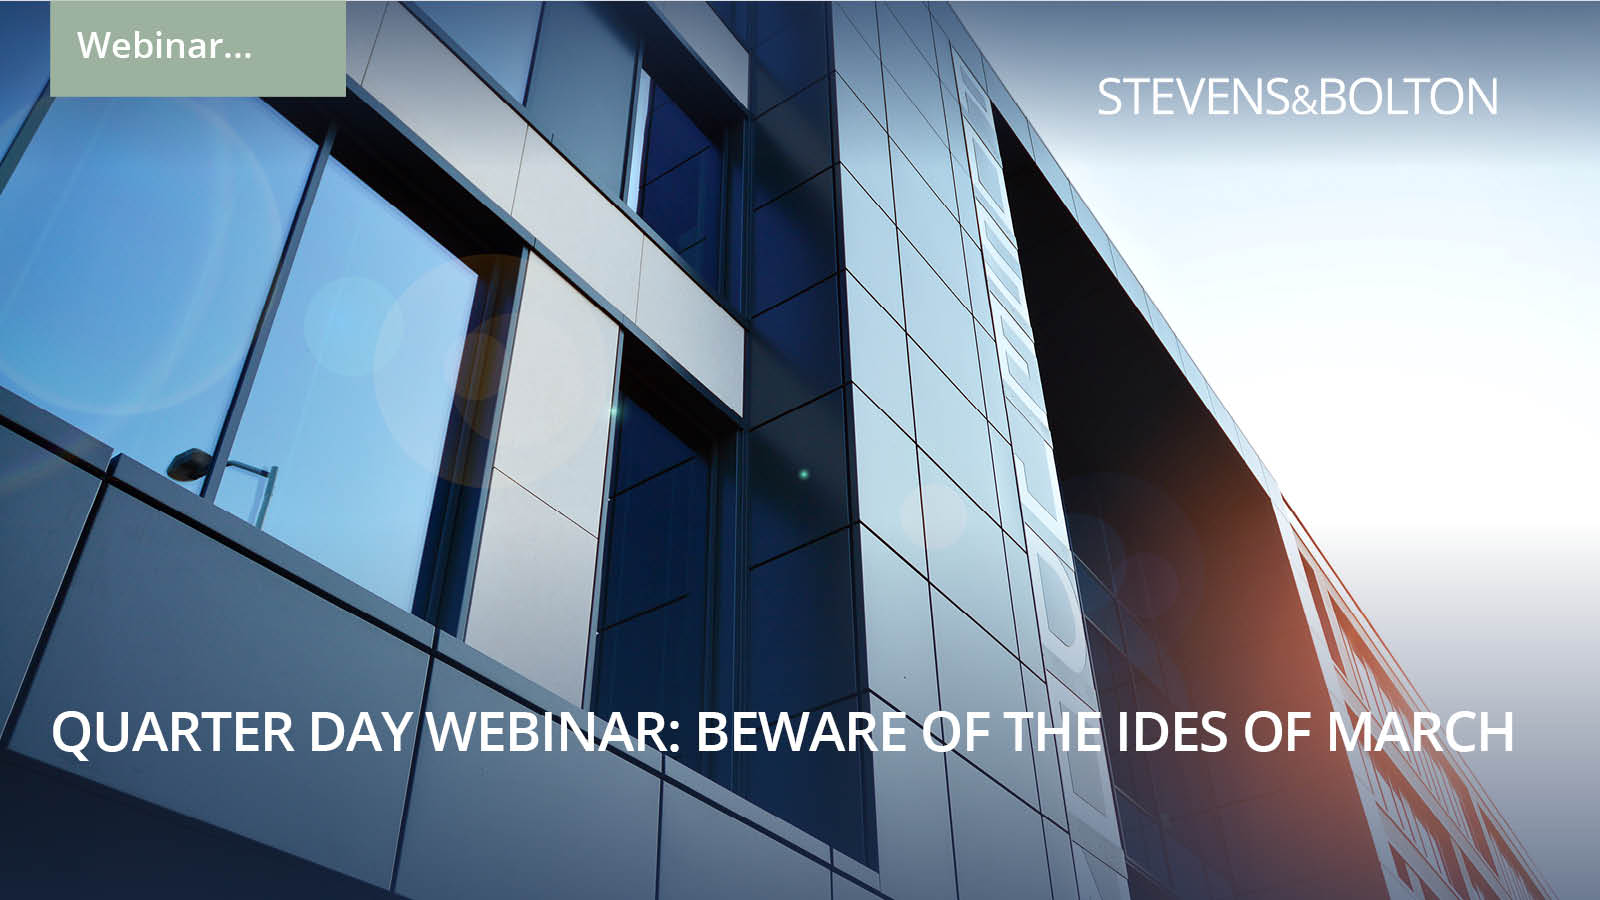 Quarter Day webinar - Beware the ides of March